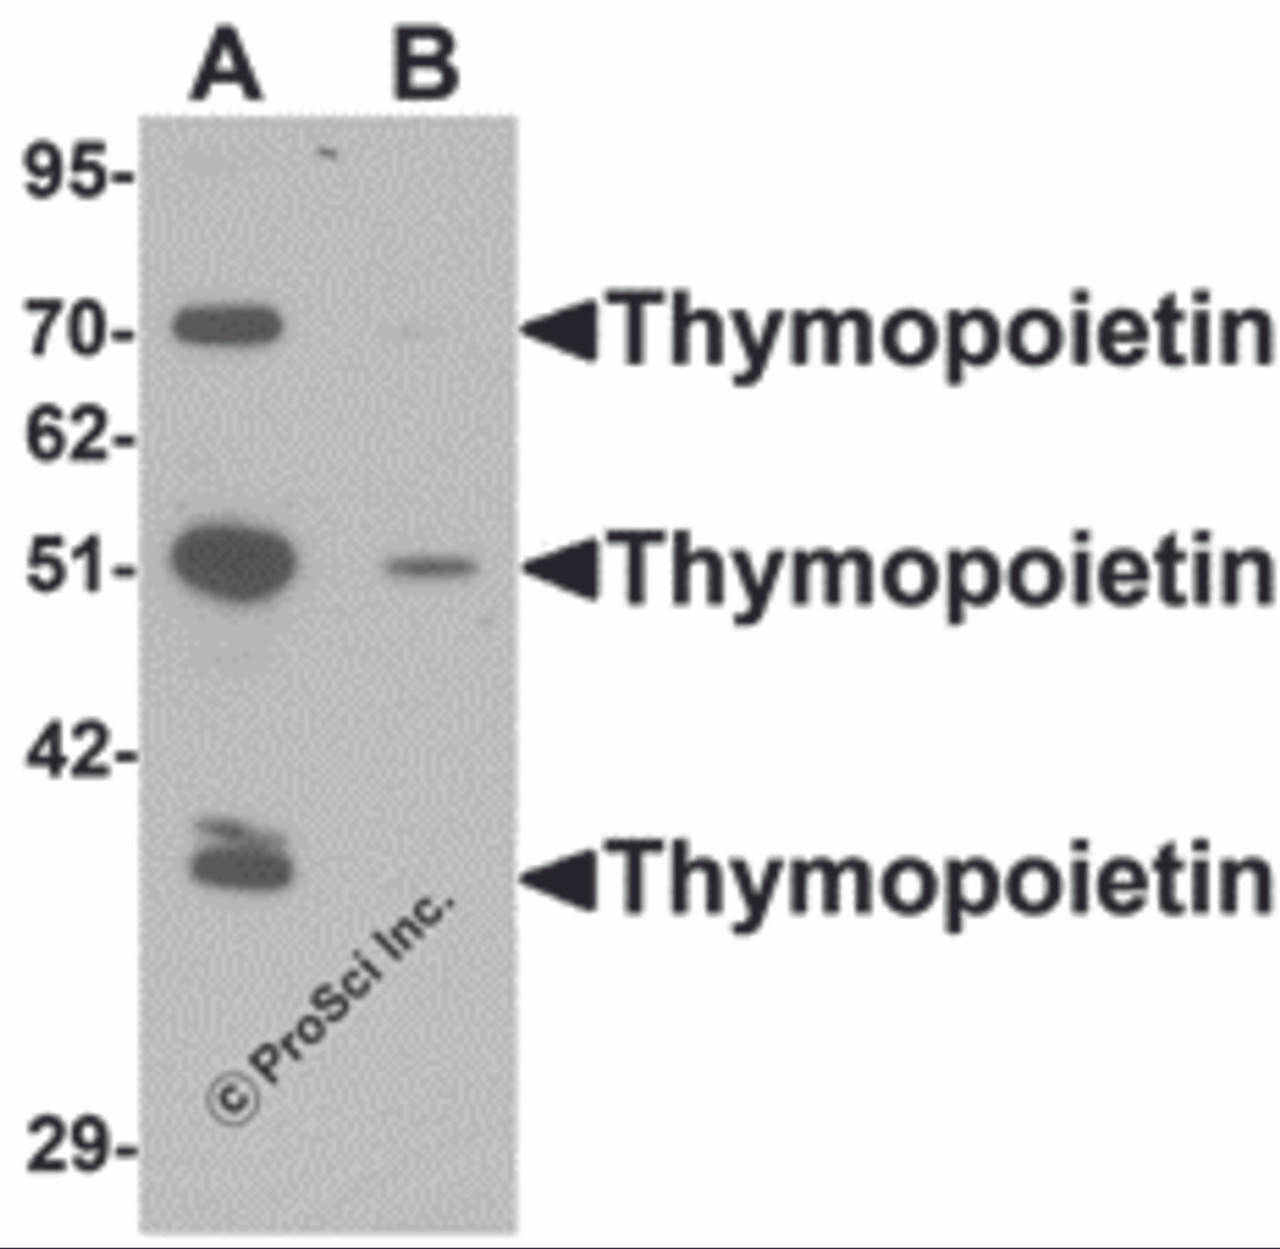 Western blot analysis of Thymopoietin in HeLa cell lysate with Thymopoietin antibody at 0.25 &#956;g/mLl in (A) the absence and (B) the presence of blocking peptide.